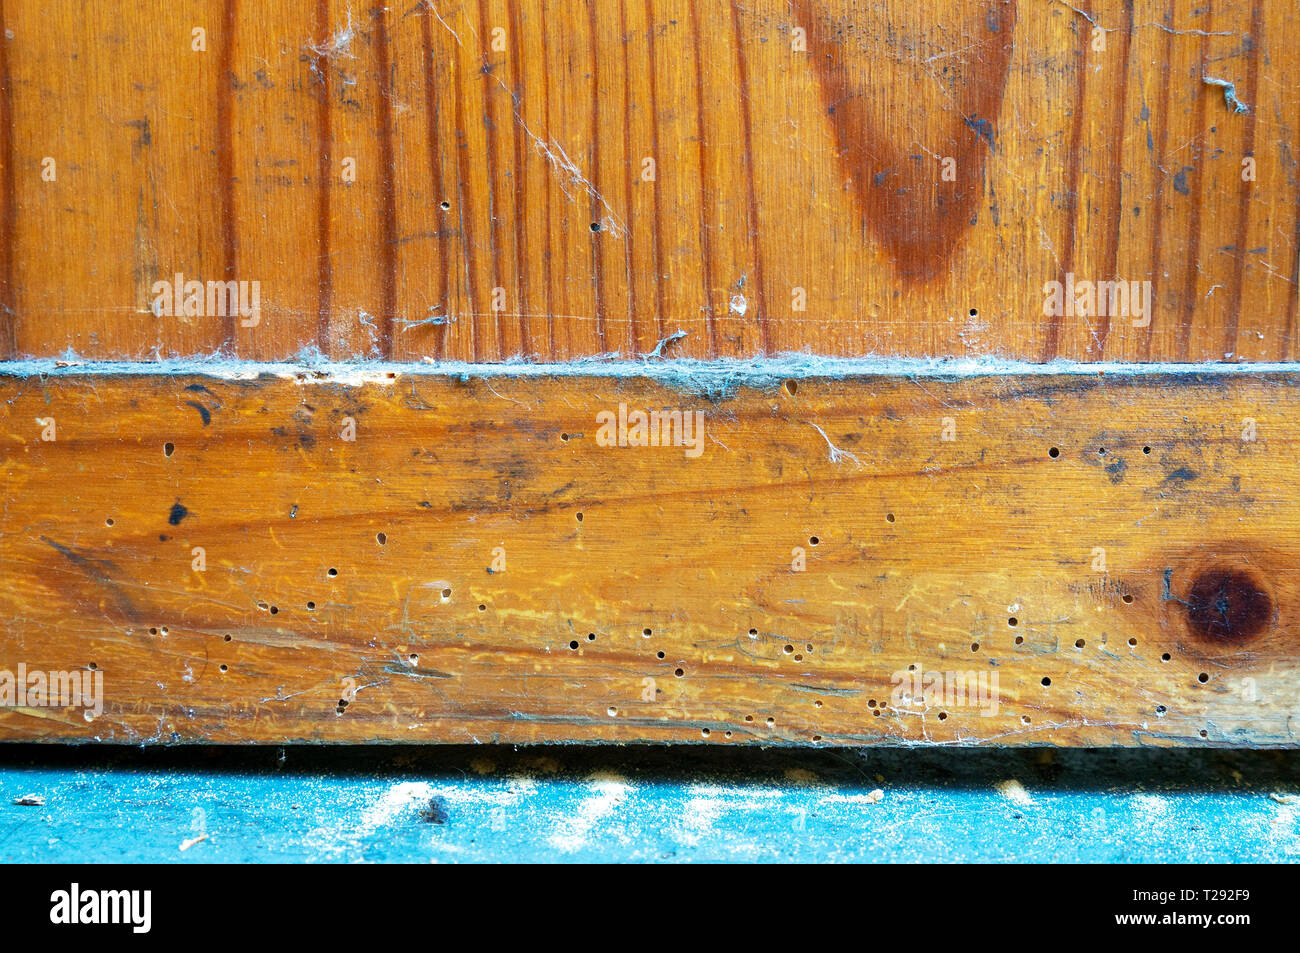 Woodworm Holes In Furniture With Wood Dust On Floor Stock Photo